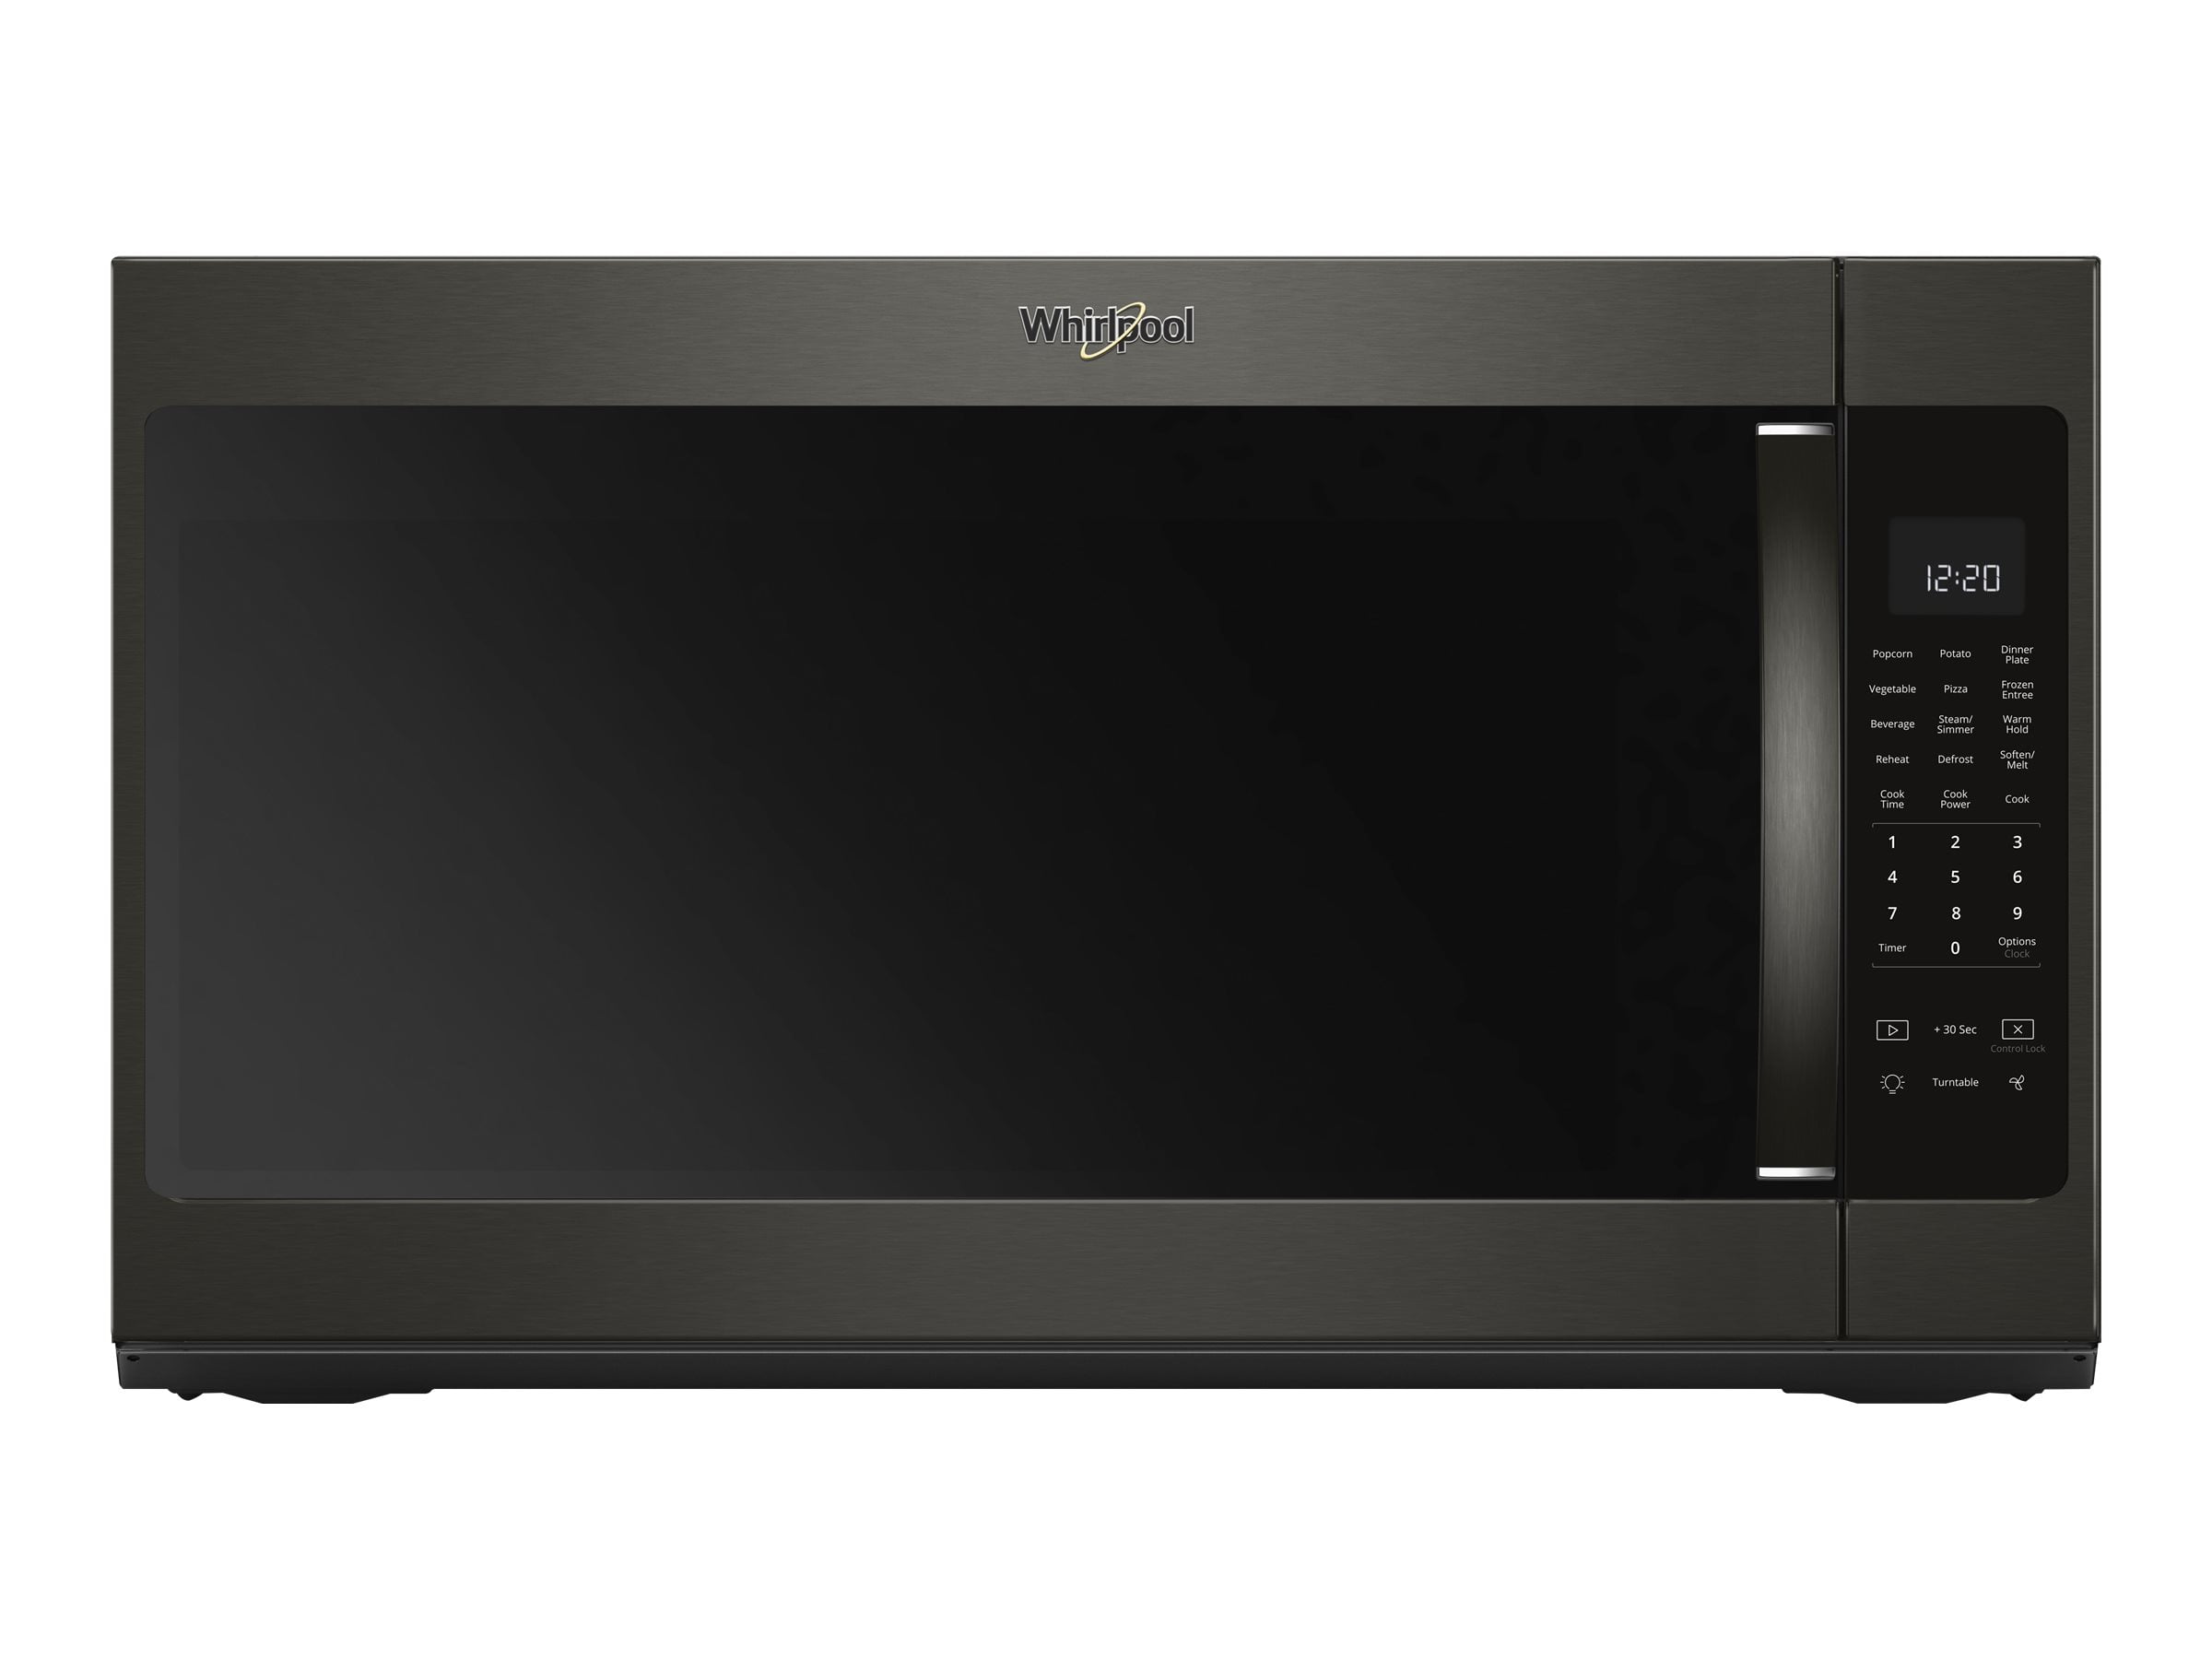 Whirlpool WMH53521HV - Microwave oven - over-range - 2.1 cu. ft - 1000